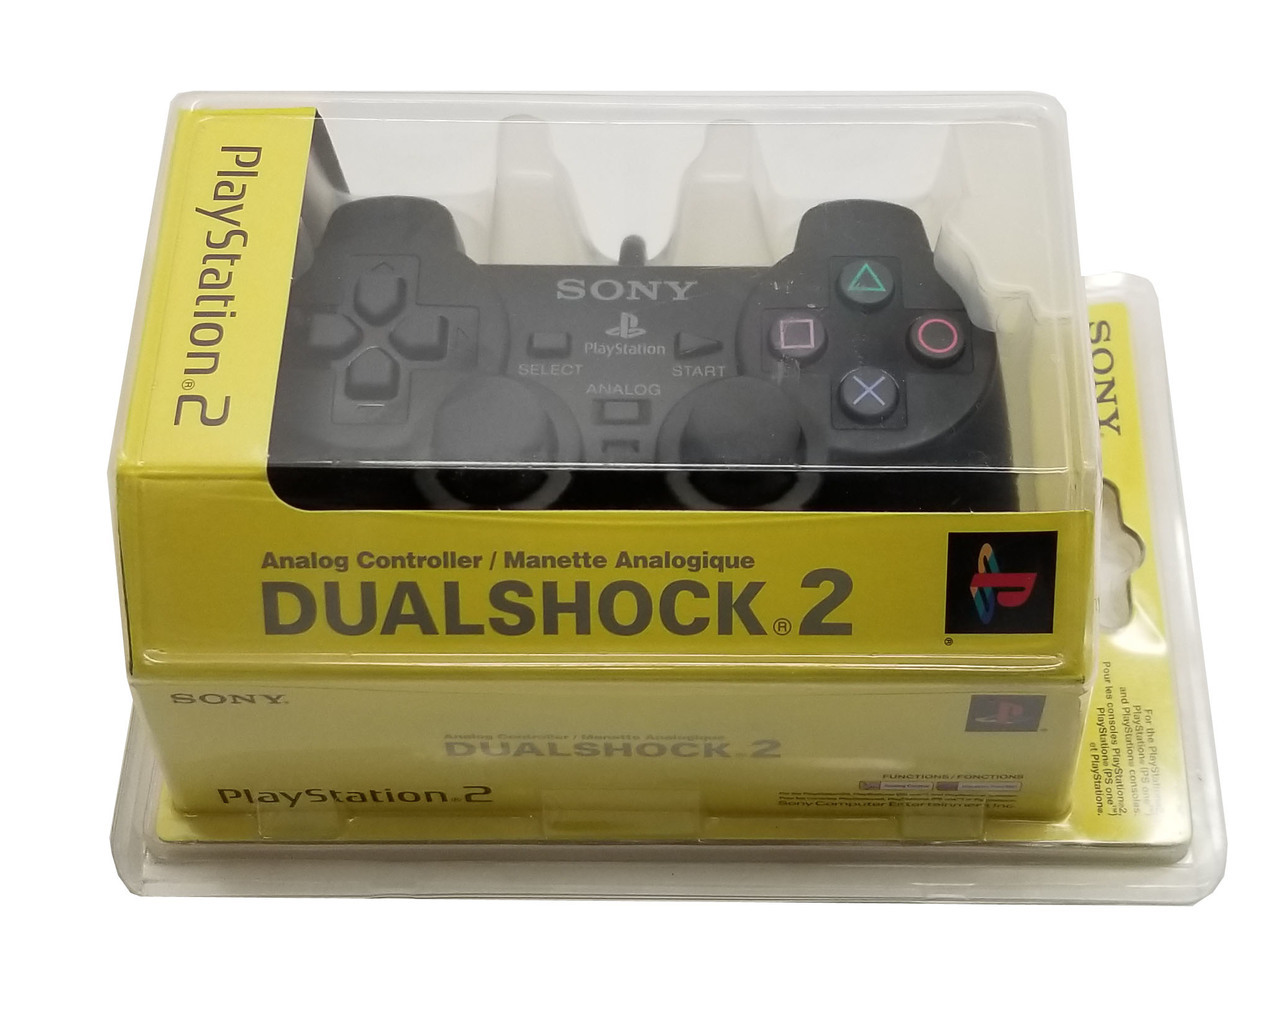 ps2 controller in store